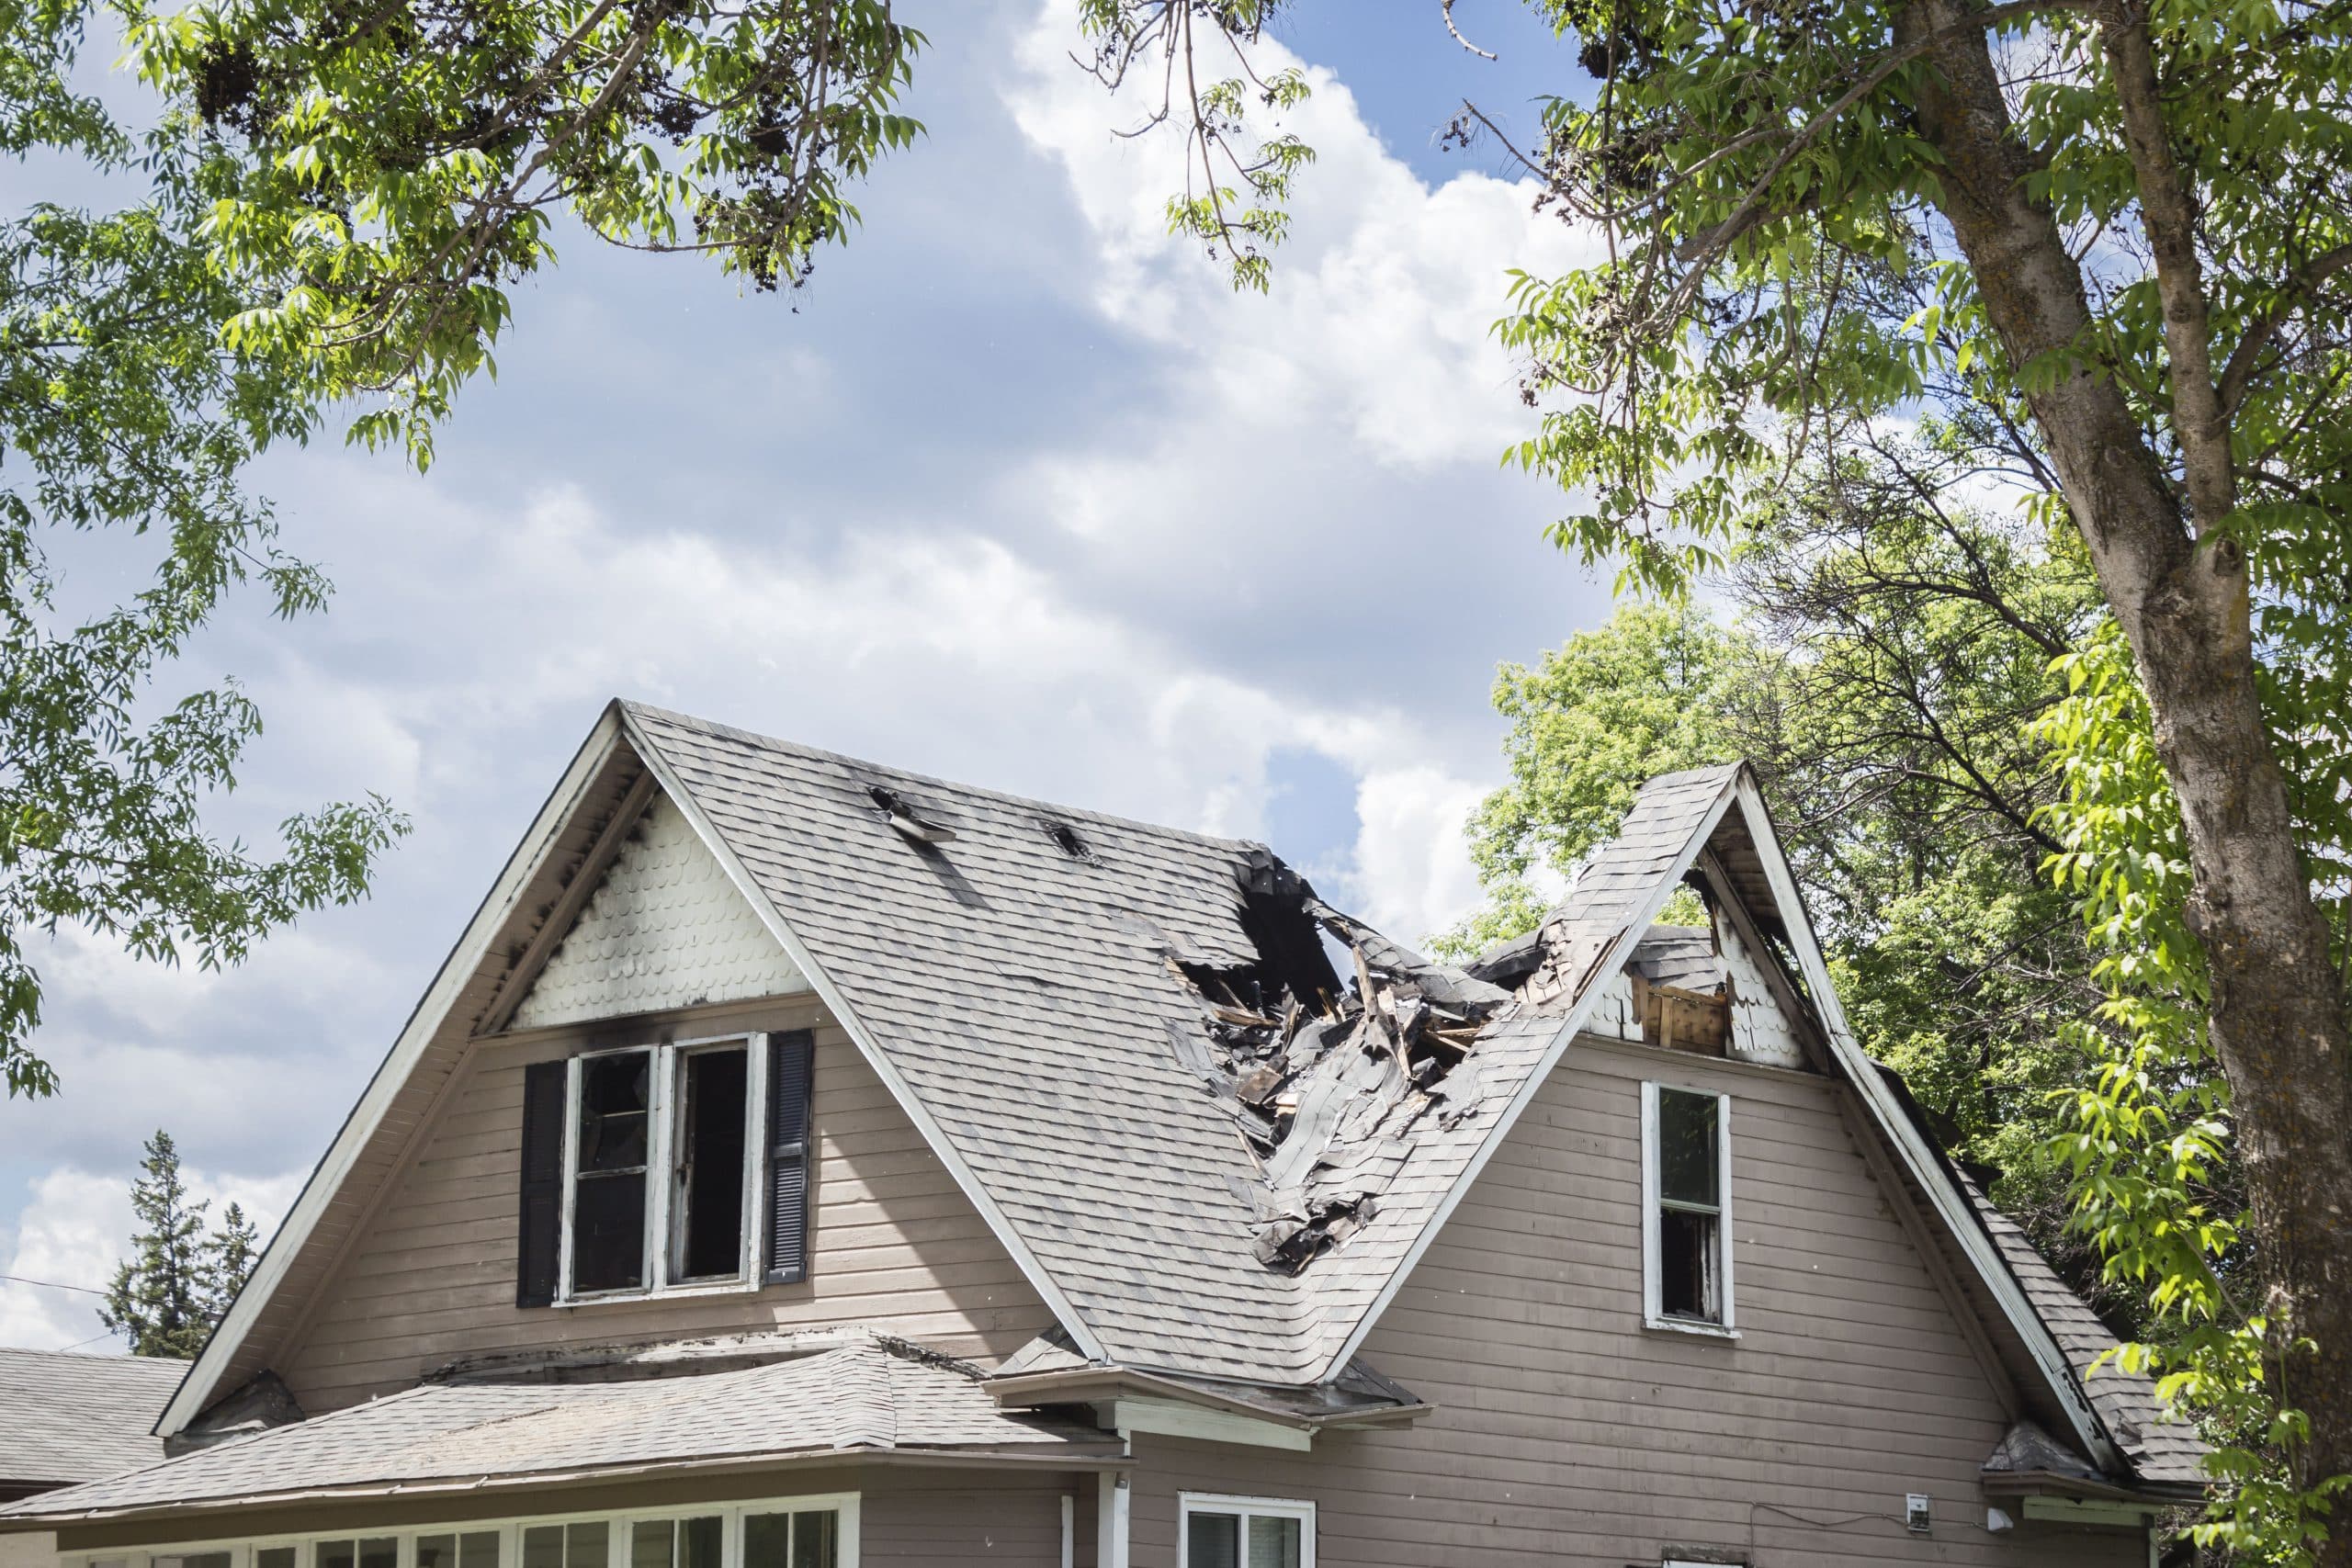 How To Handle A Property Damage Claim